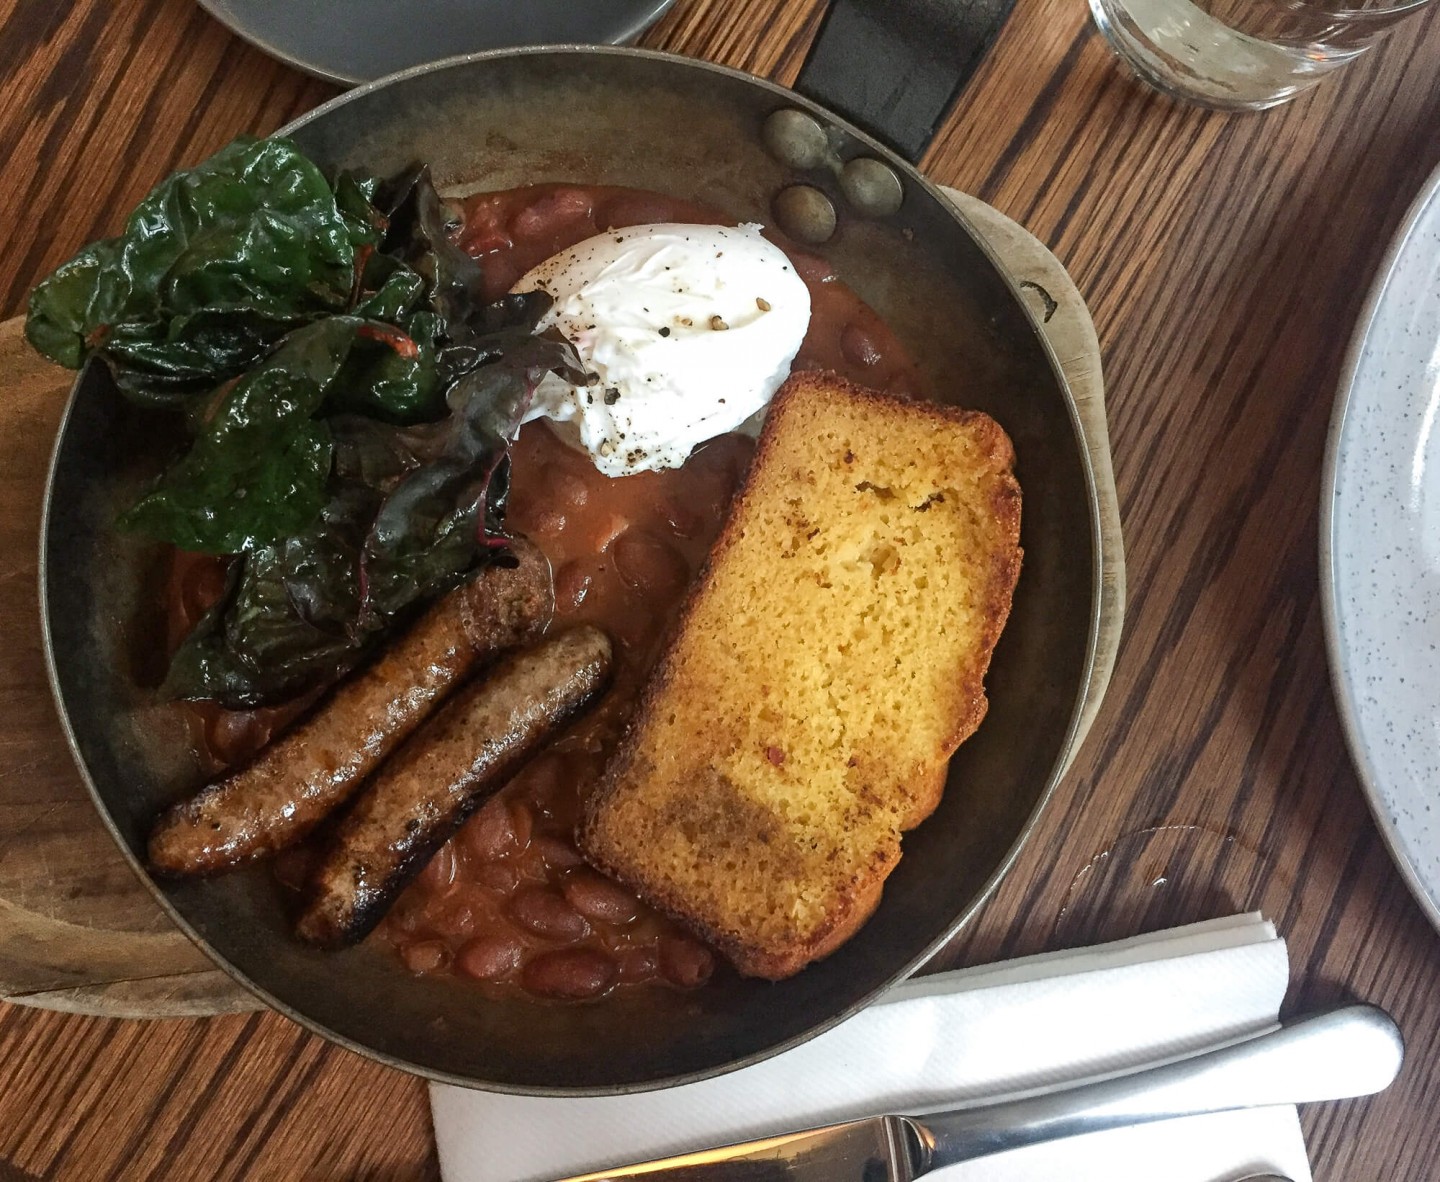 London brunch | Brunch at Salon in Brixton. This is a super cosy restaurant that serves a small menu of brunch items. Really fresh, seasonal food. Add to your London brunch list!